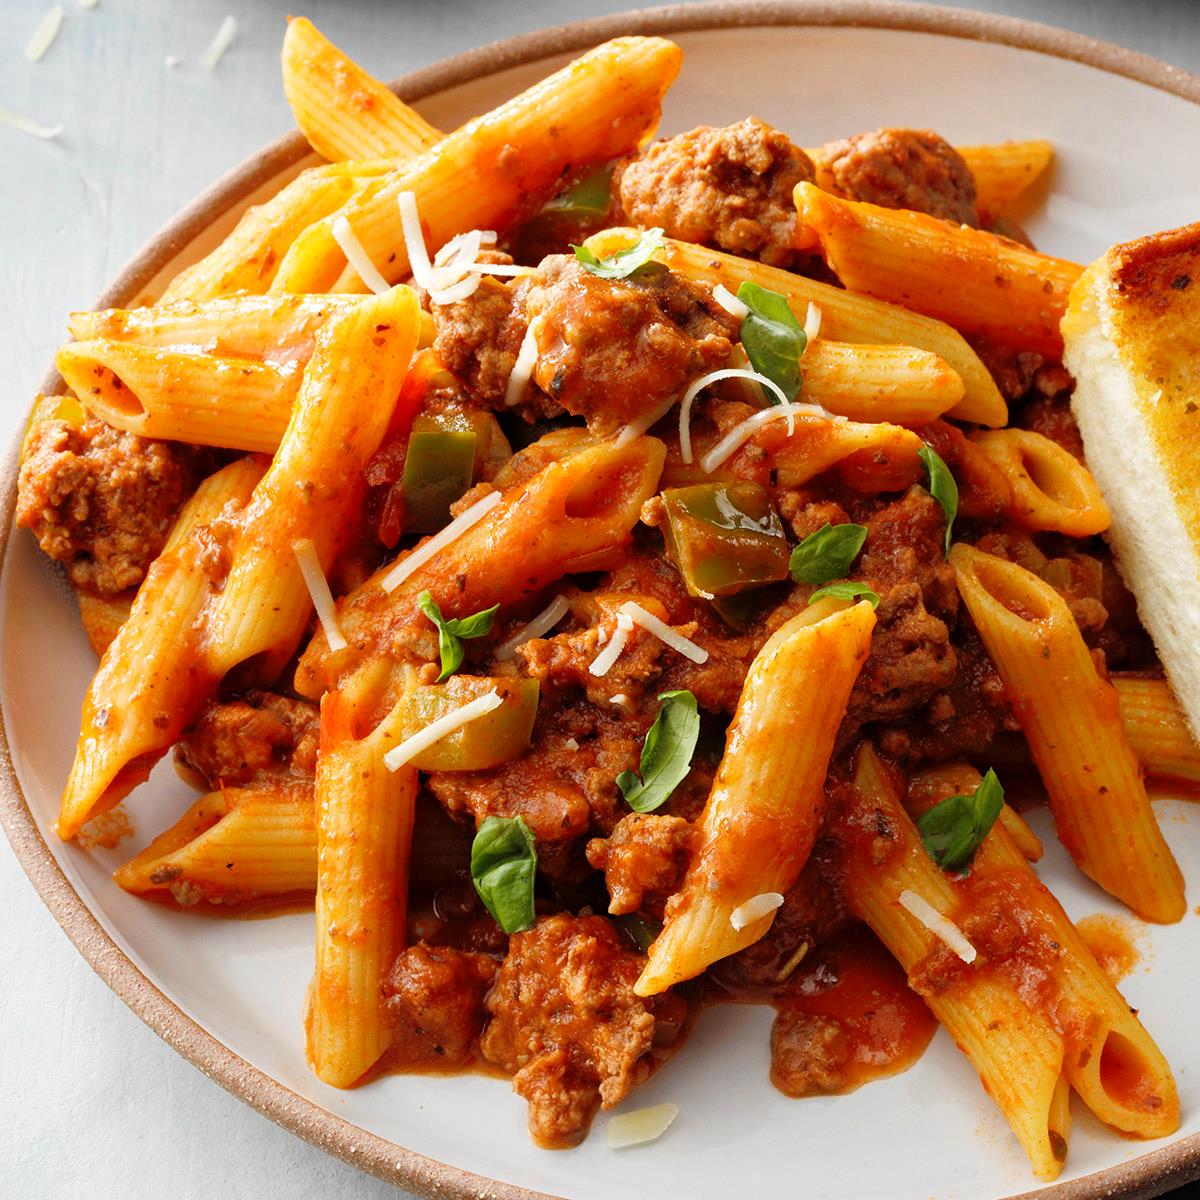 Pressure-Cooker Penne with Meat Sauce Recipe: How to Make It